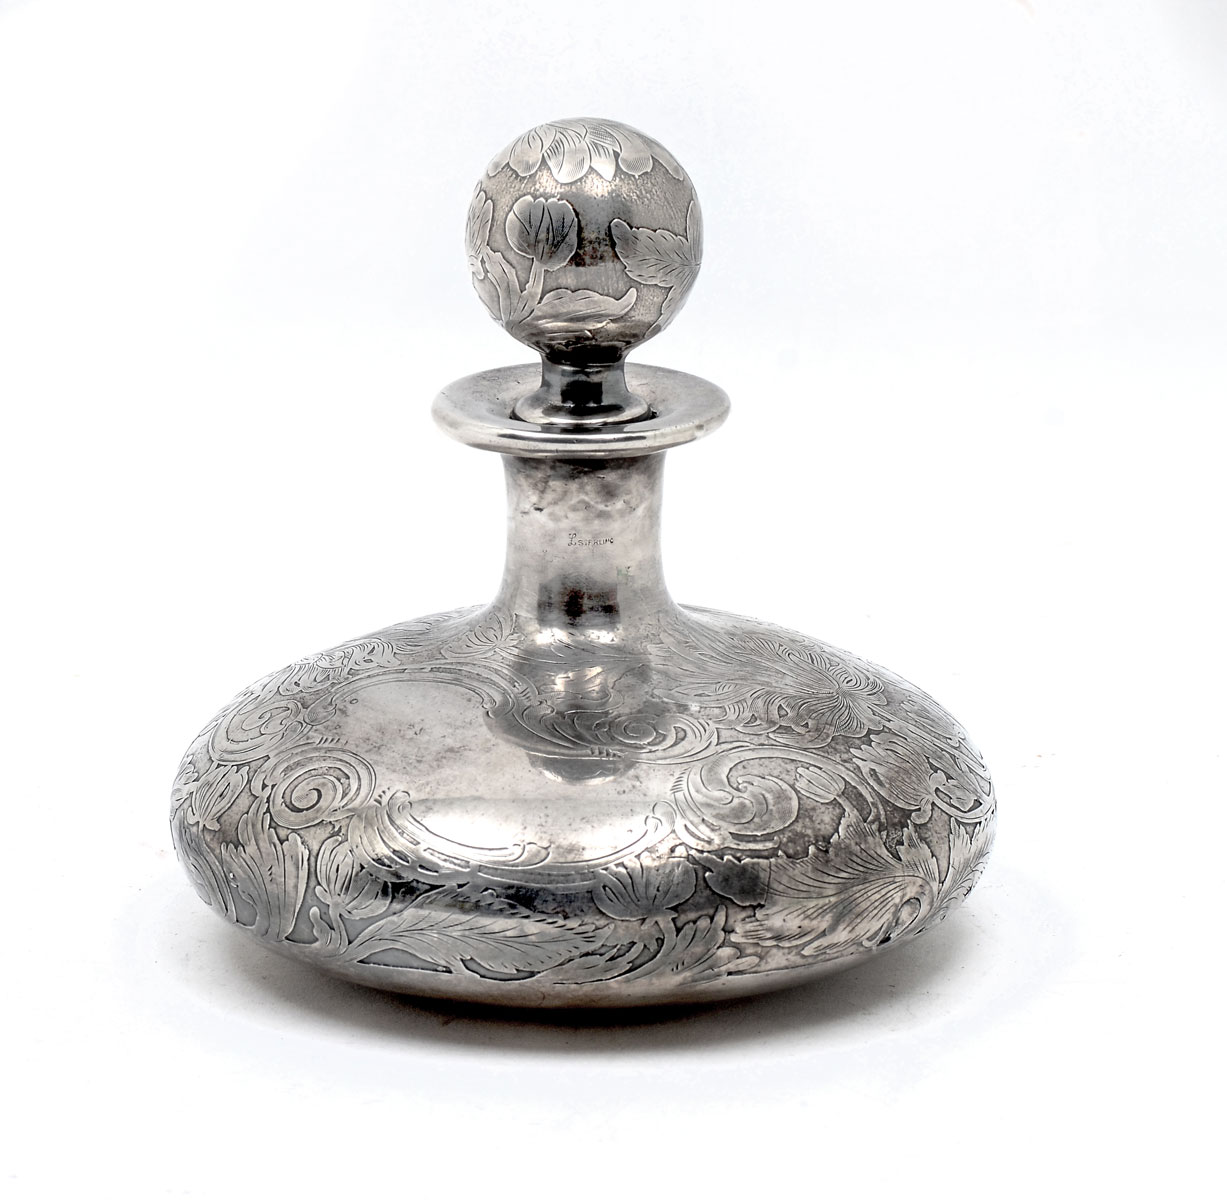 STERLING OVERLAY SHIPS DECANTER: